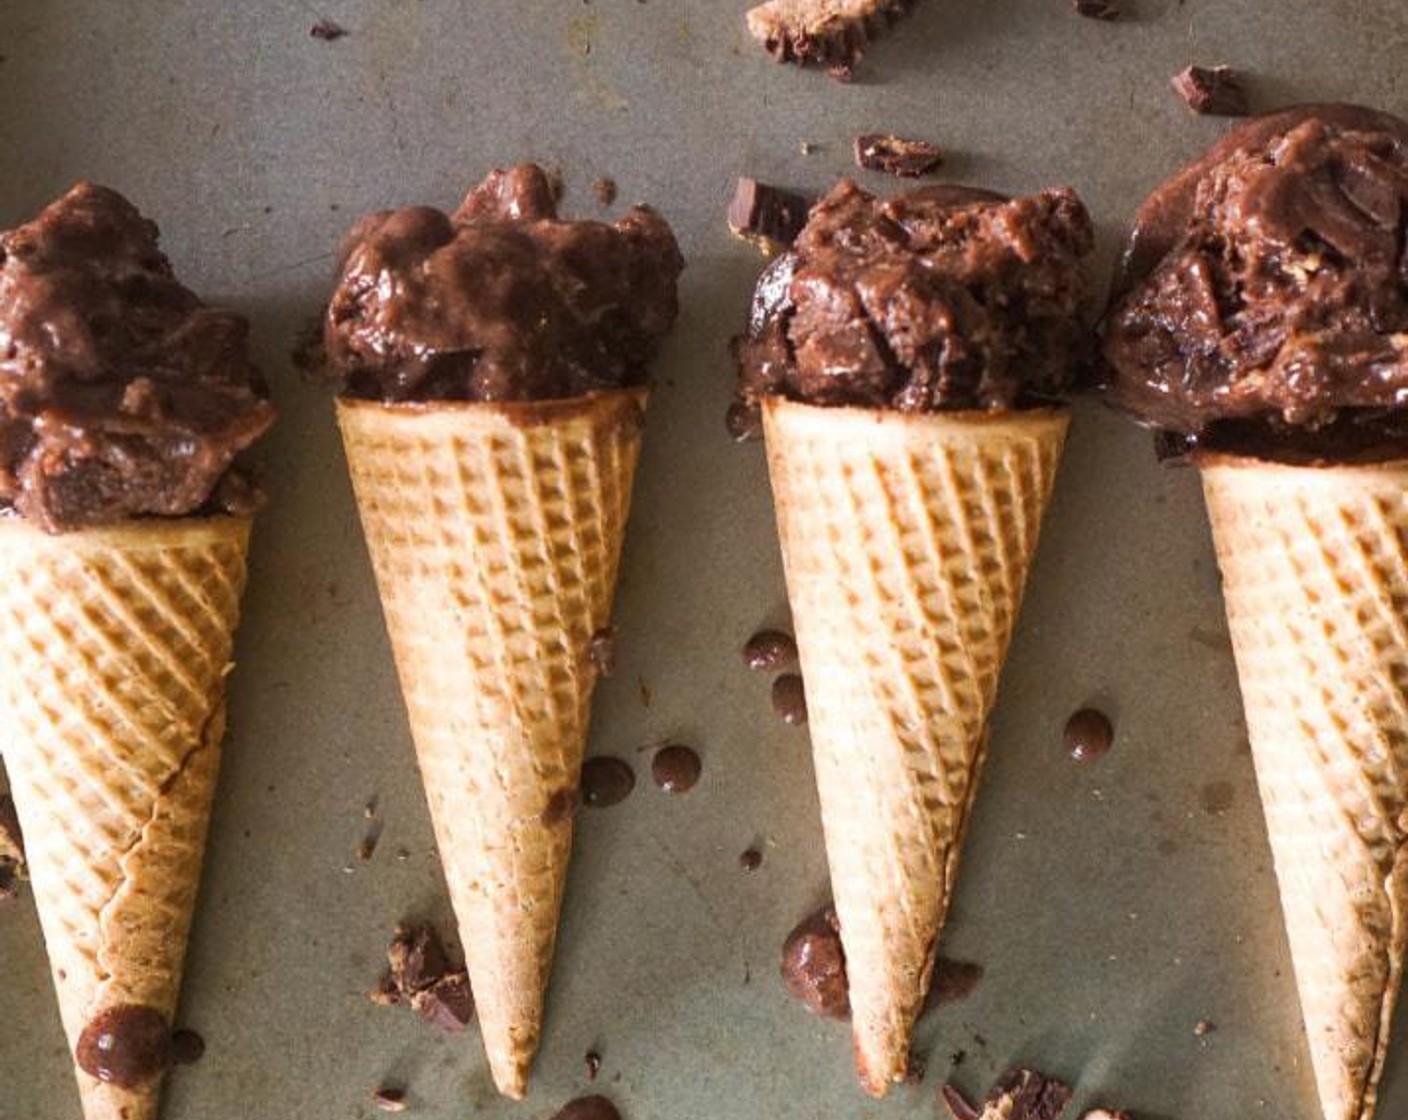 Almond Butter Cup "Ice Cream"